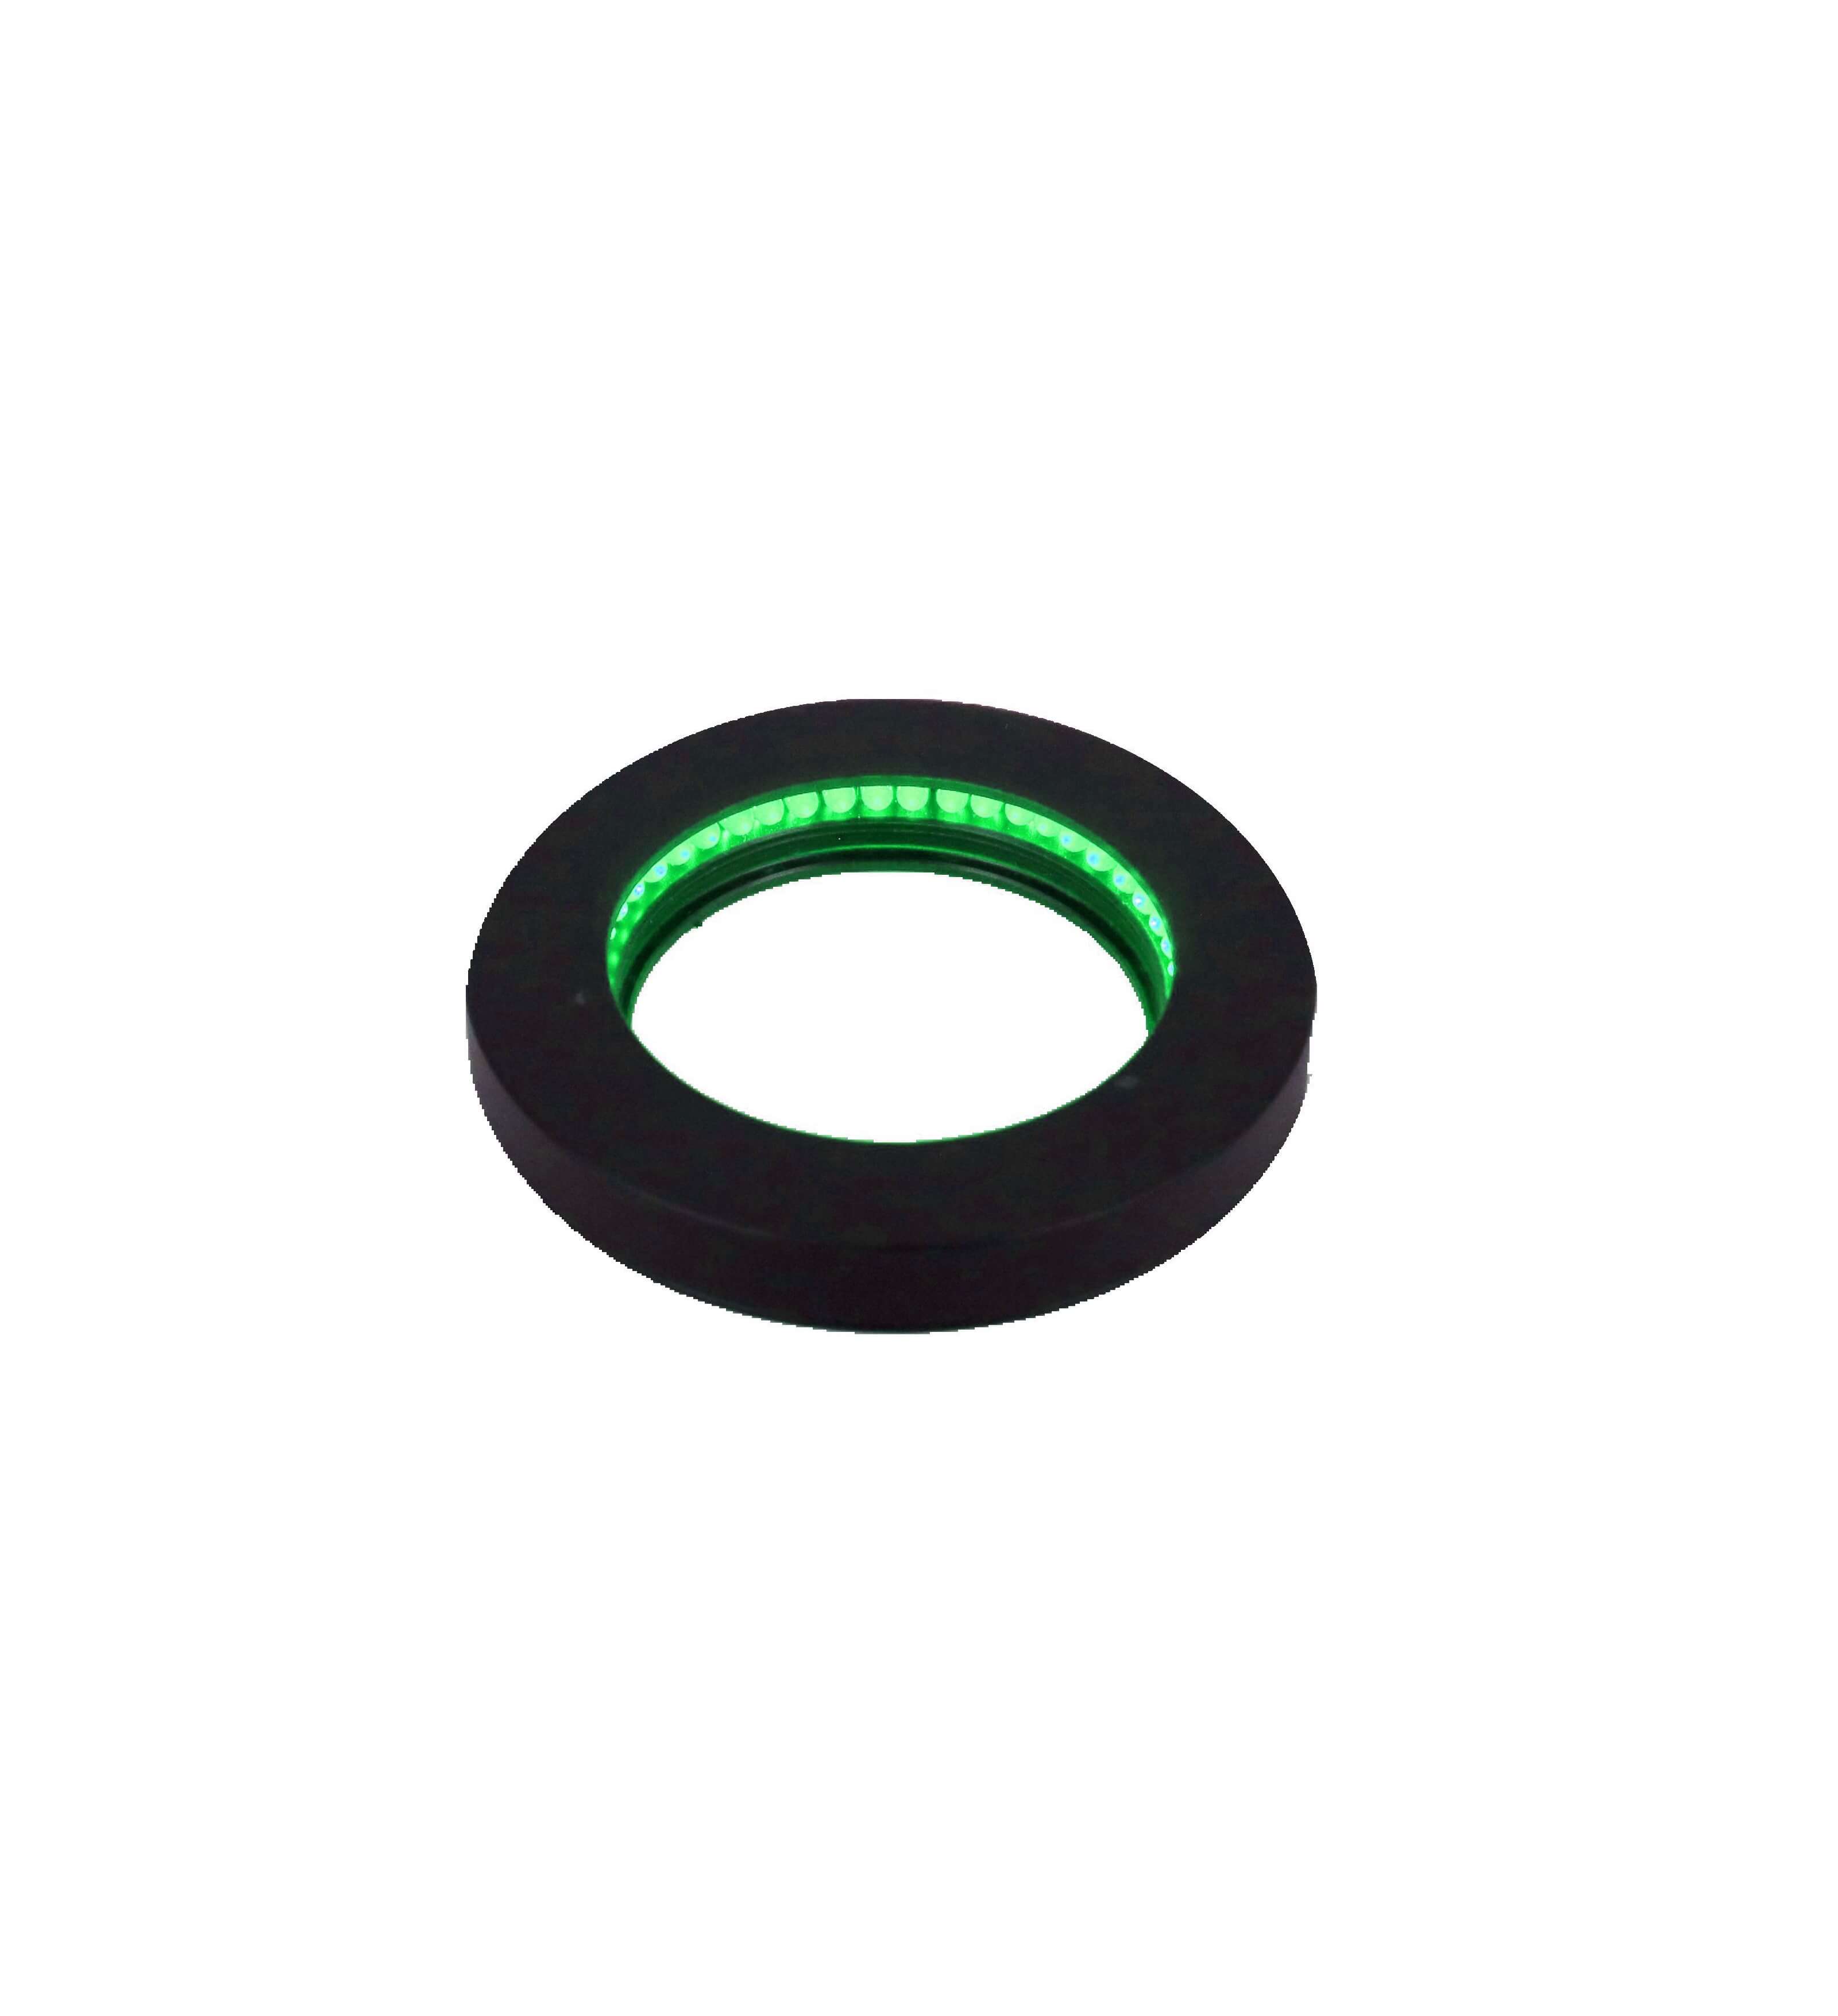 FDR-75/46 Low Angle Ring Light – Green